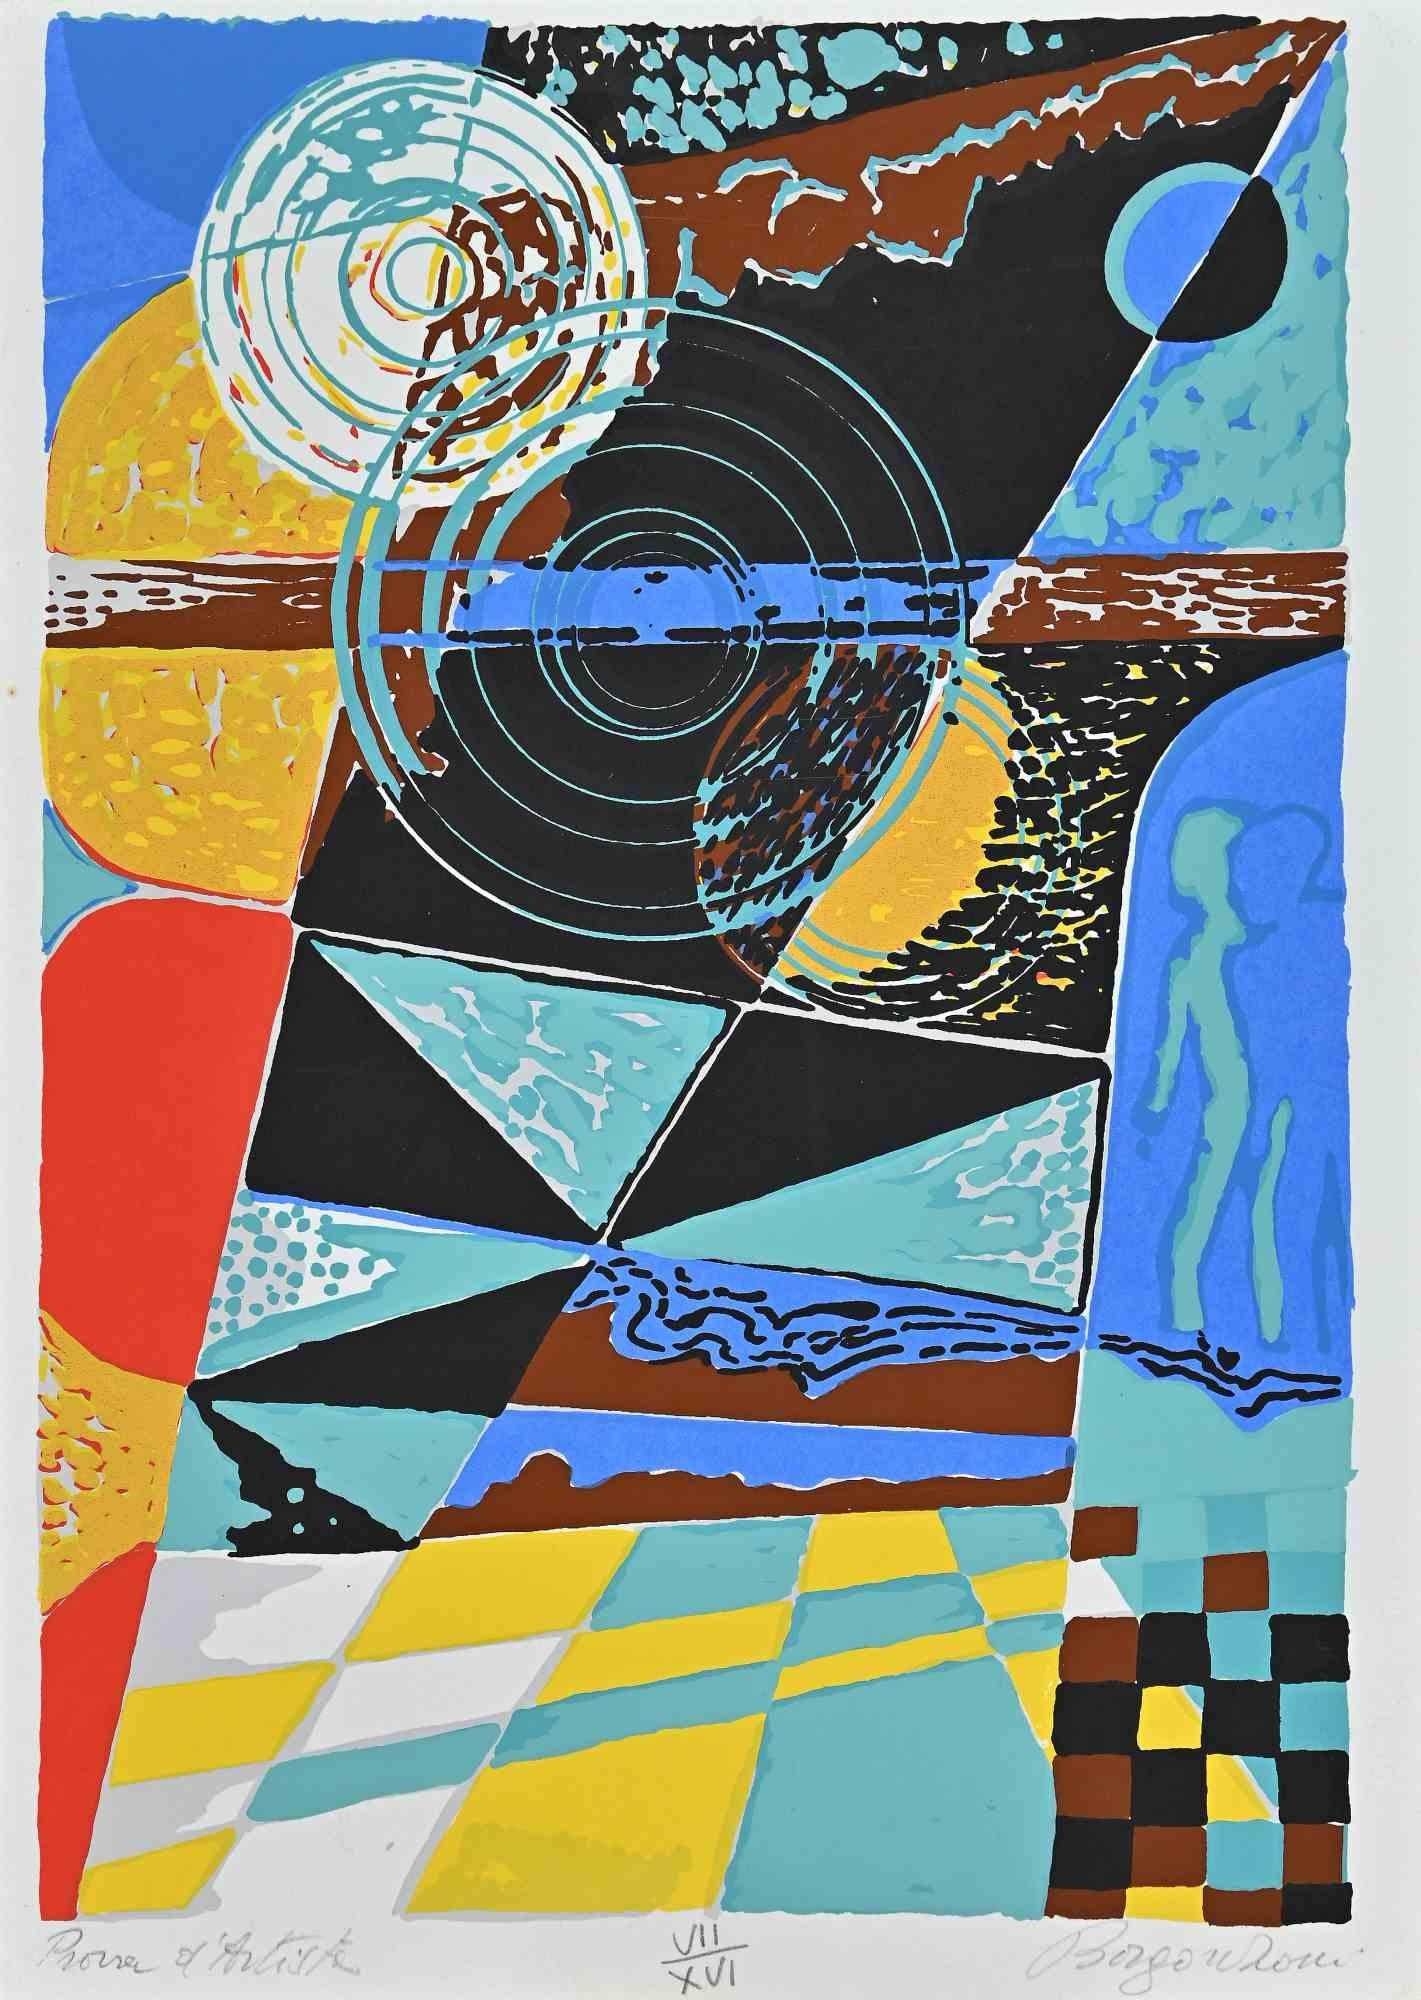 The Blue Space is a screen print on paper realized in 1975 by Aldo Borgonzoni (1913-2004).

Hand-signed and numbered, edition of VII /XVI prints.

The state of preservation of the artwork is very good.